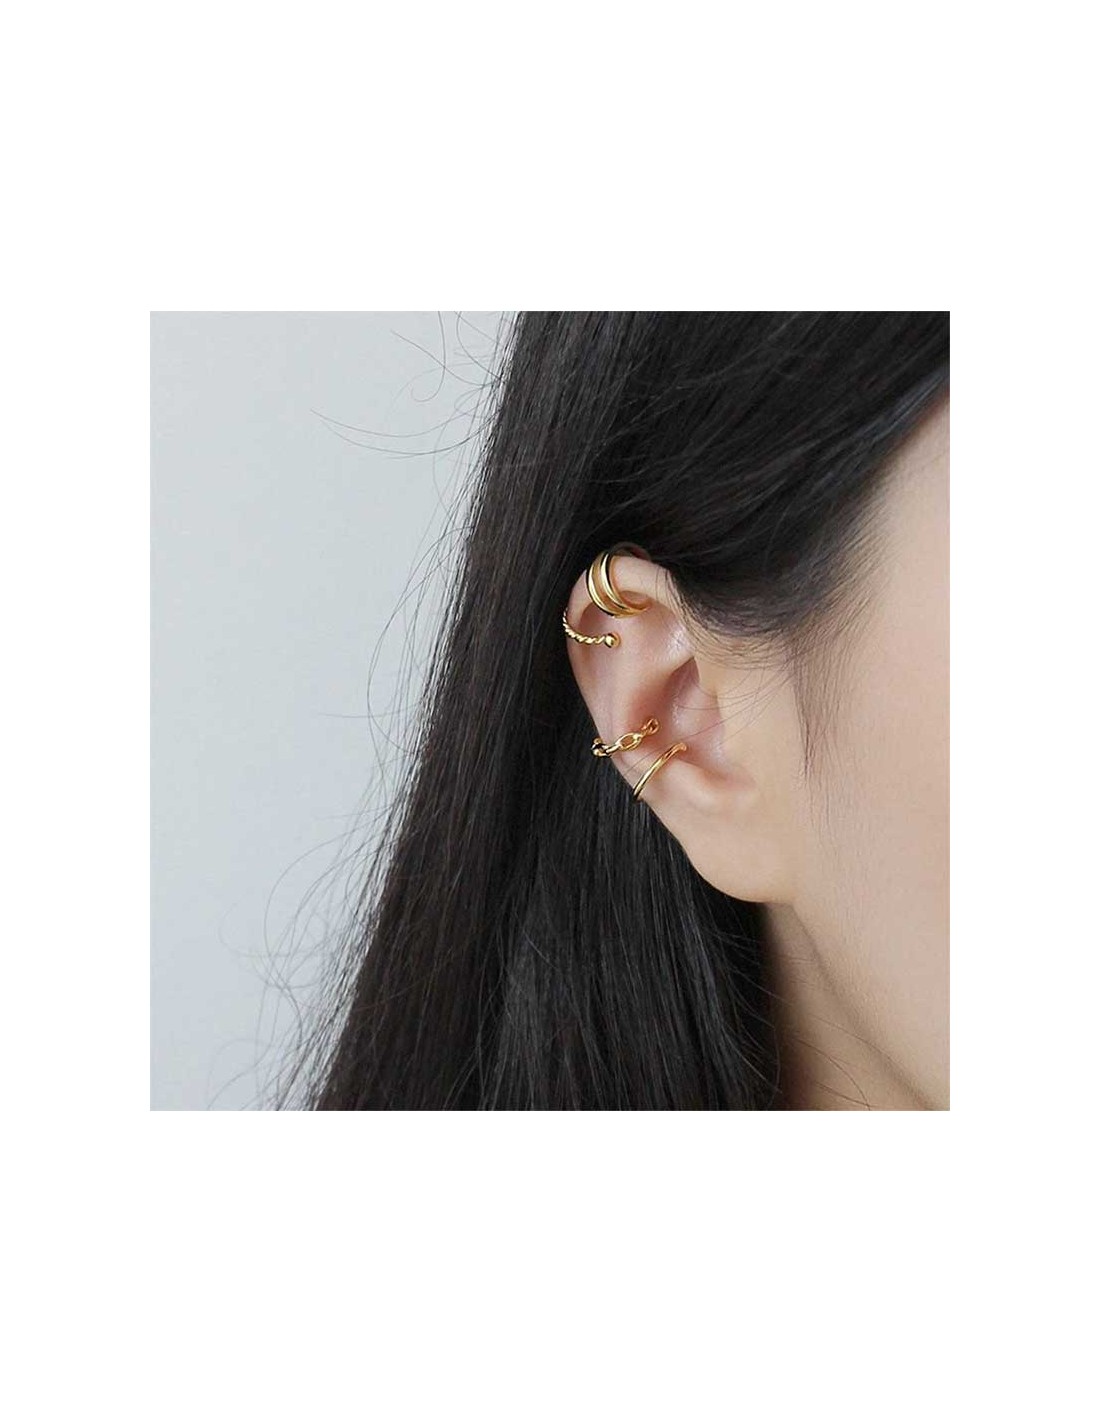 Aggregate 129+ without hole earrings super hot